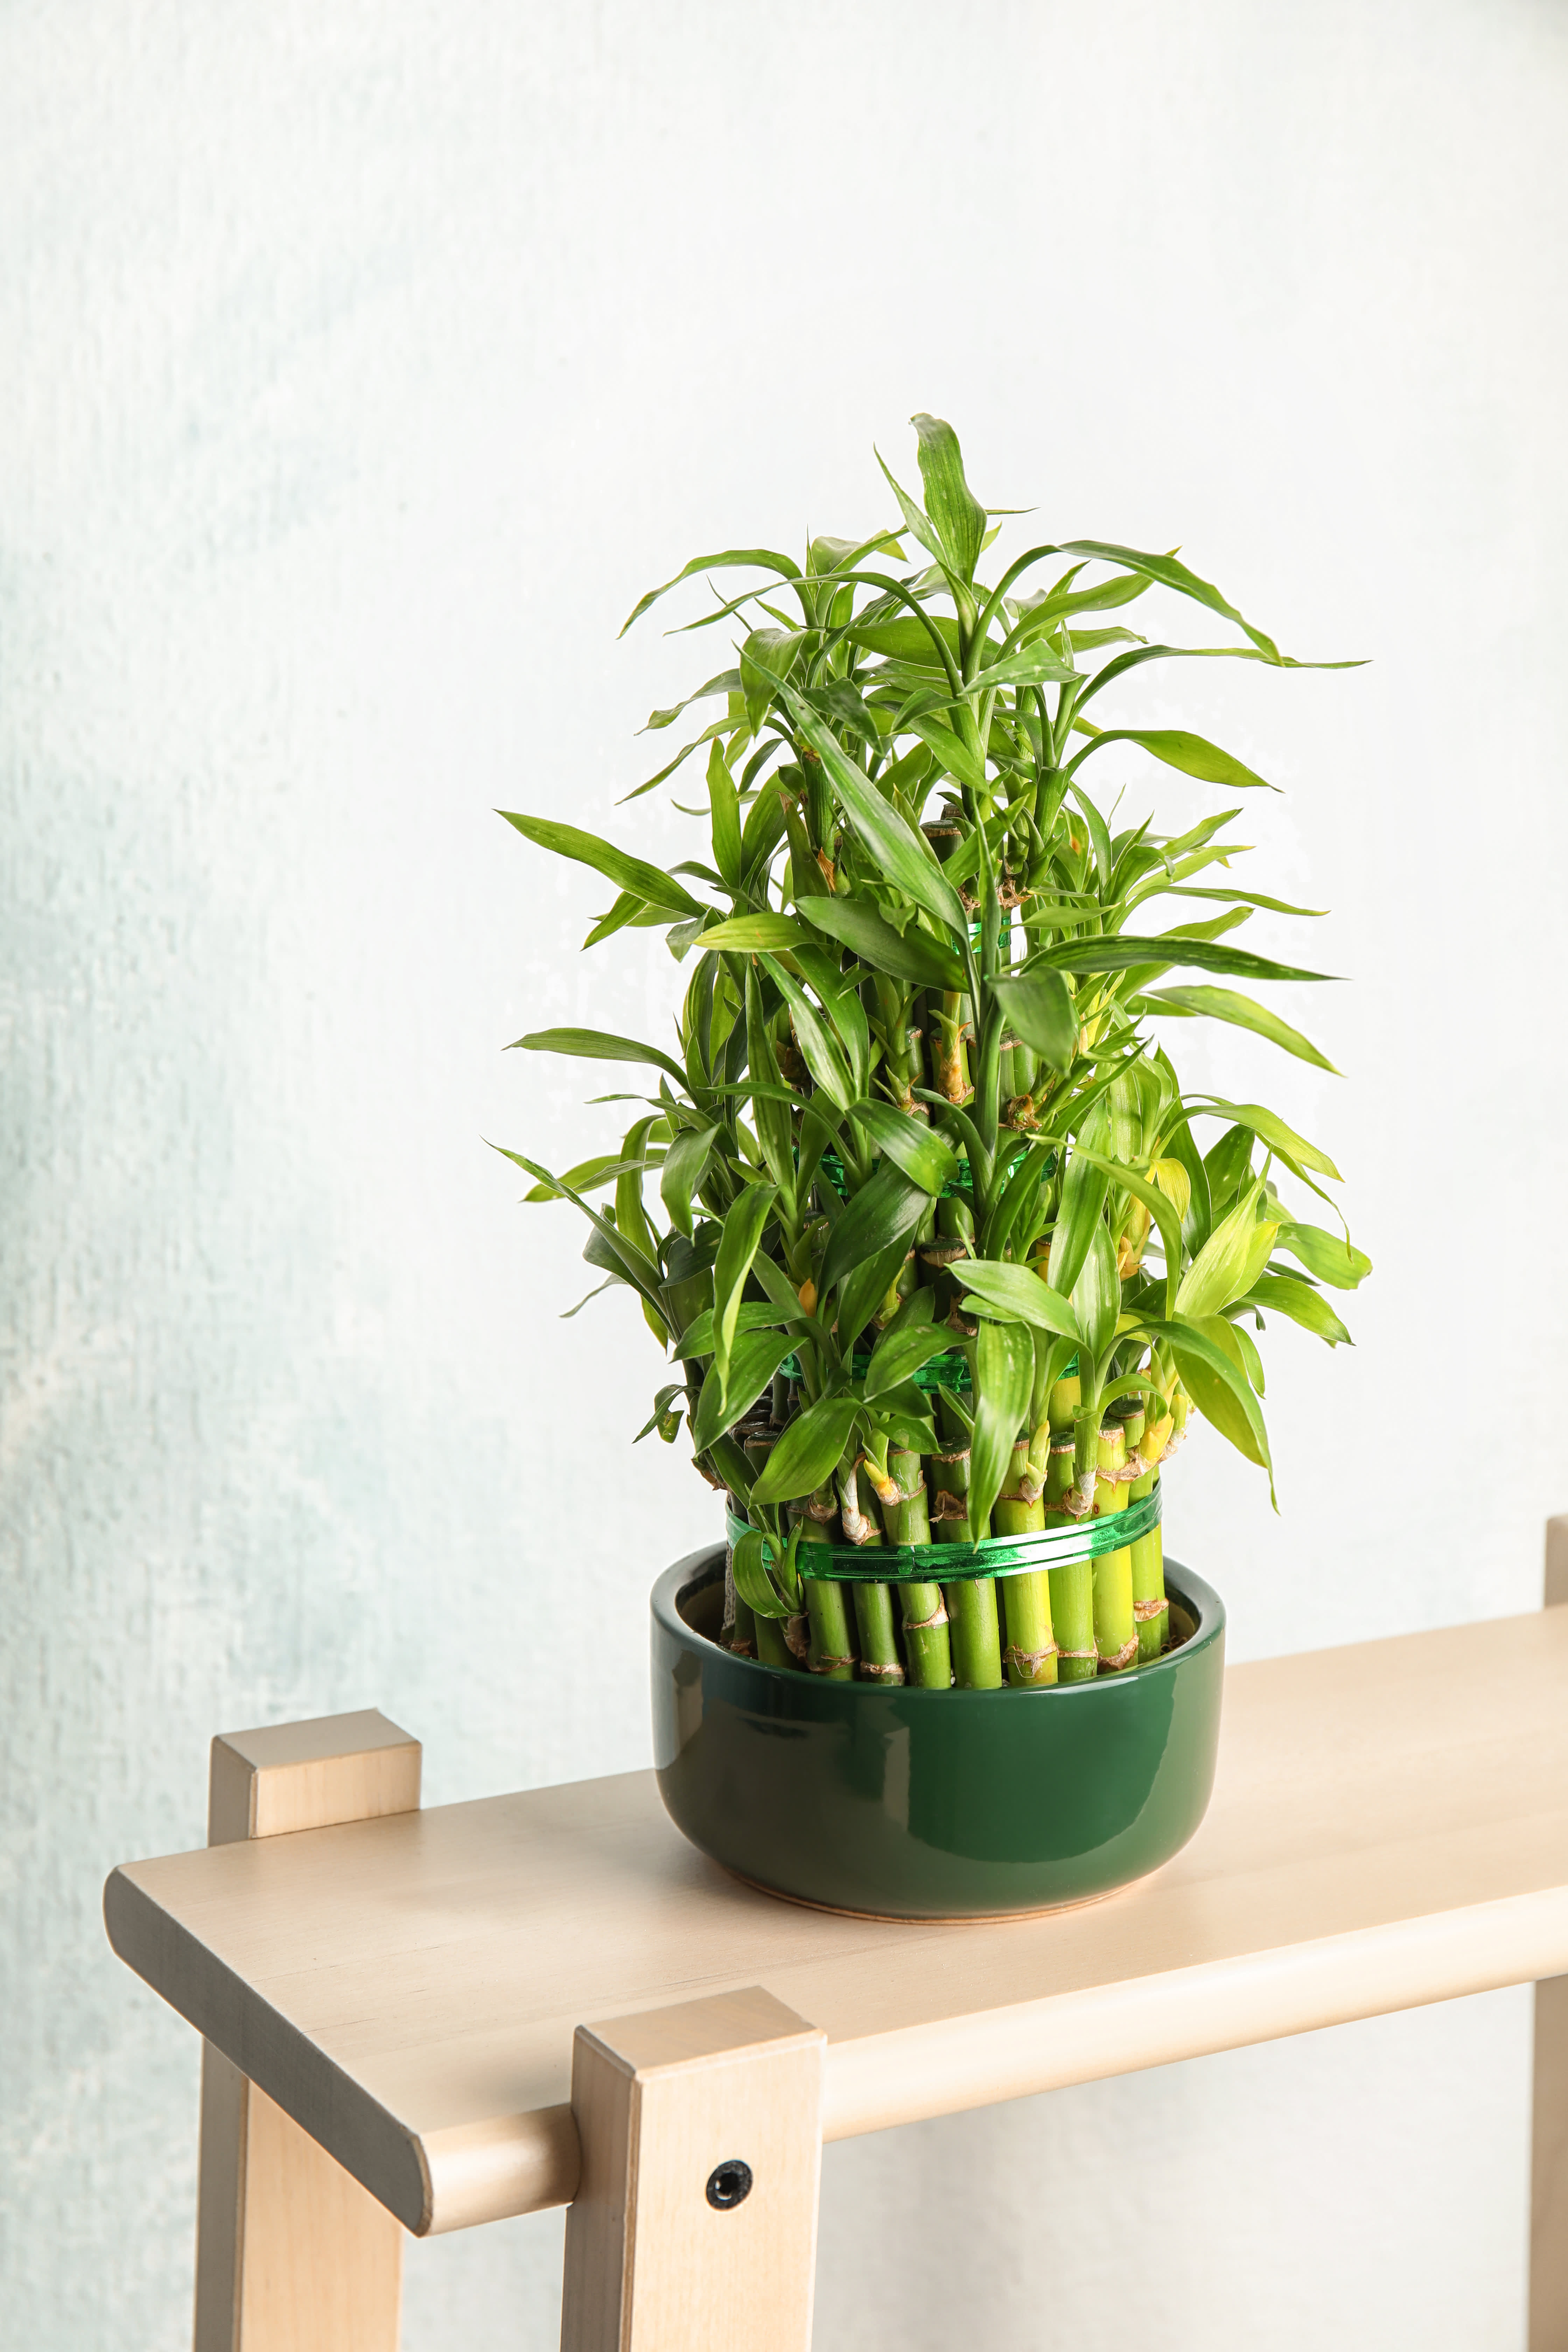 Properties and care of bamboo